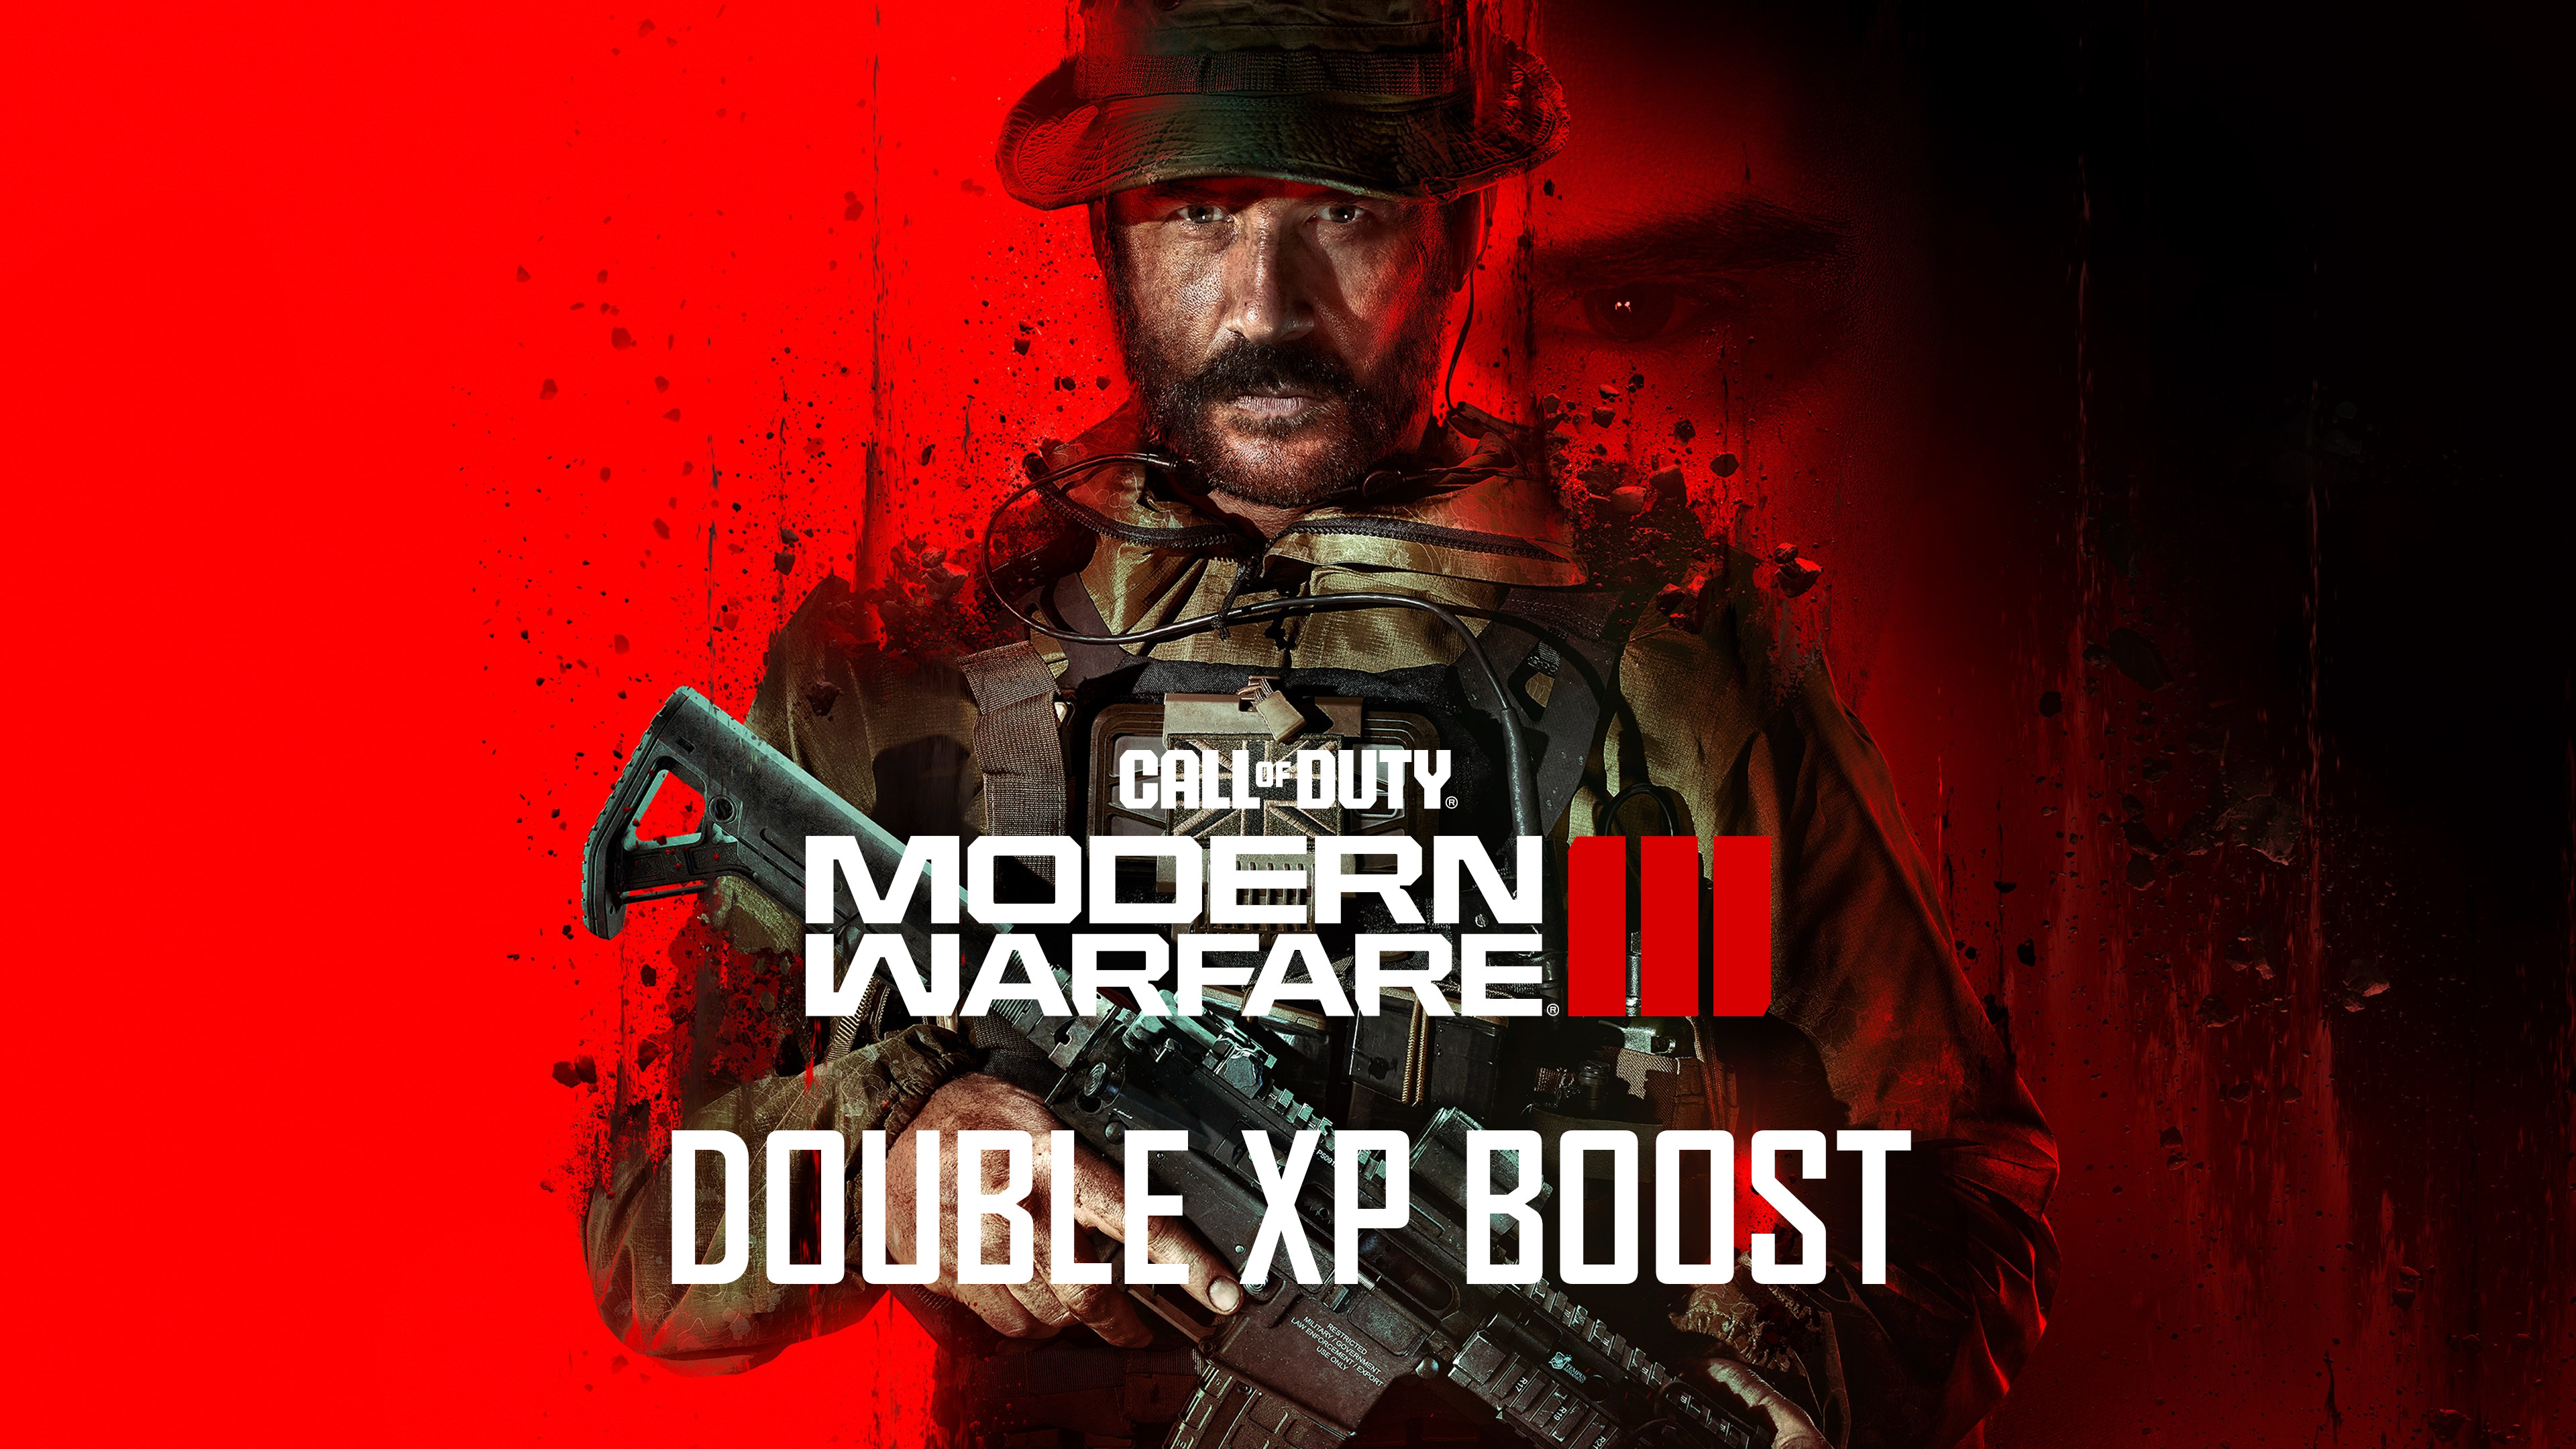 Call of Duty: Modern Warfare III - 5 Hours Double XP Boost PC/PS4/PS5/XBOX One/Series X|S CD Key, 4.52 usd